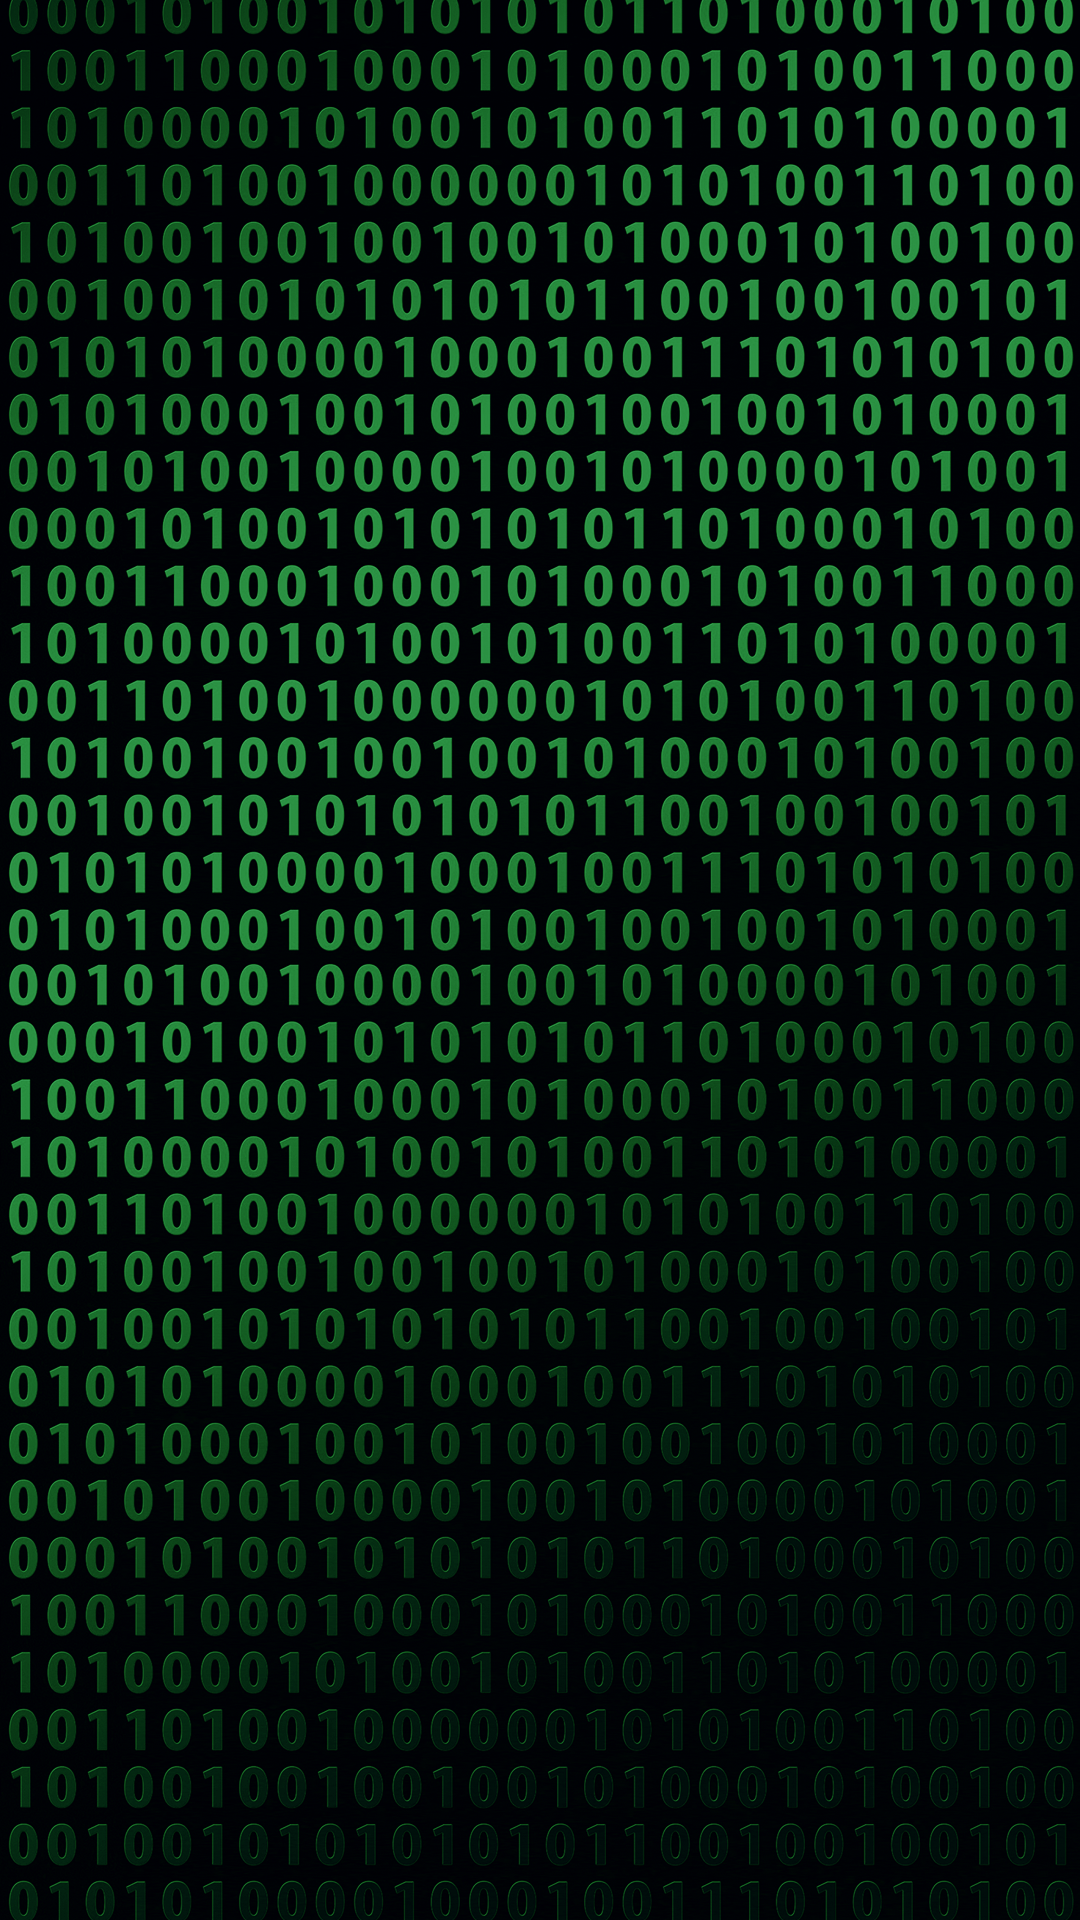 Free HD Binary Code iPhone Wallpaper For Download .0316